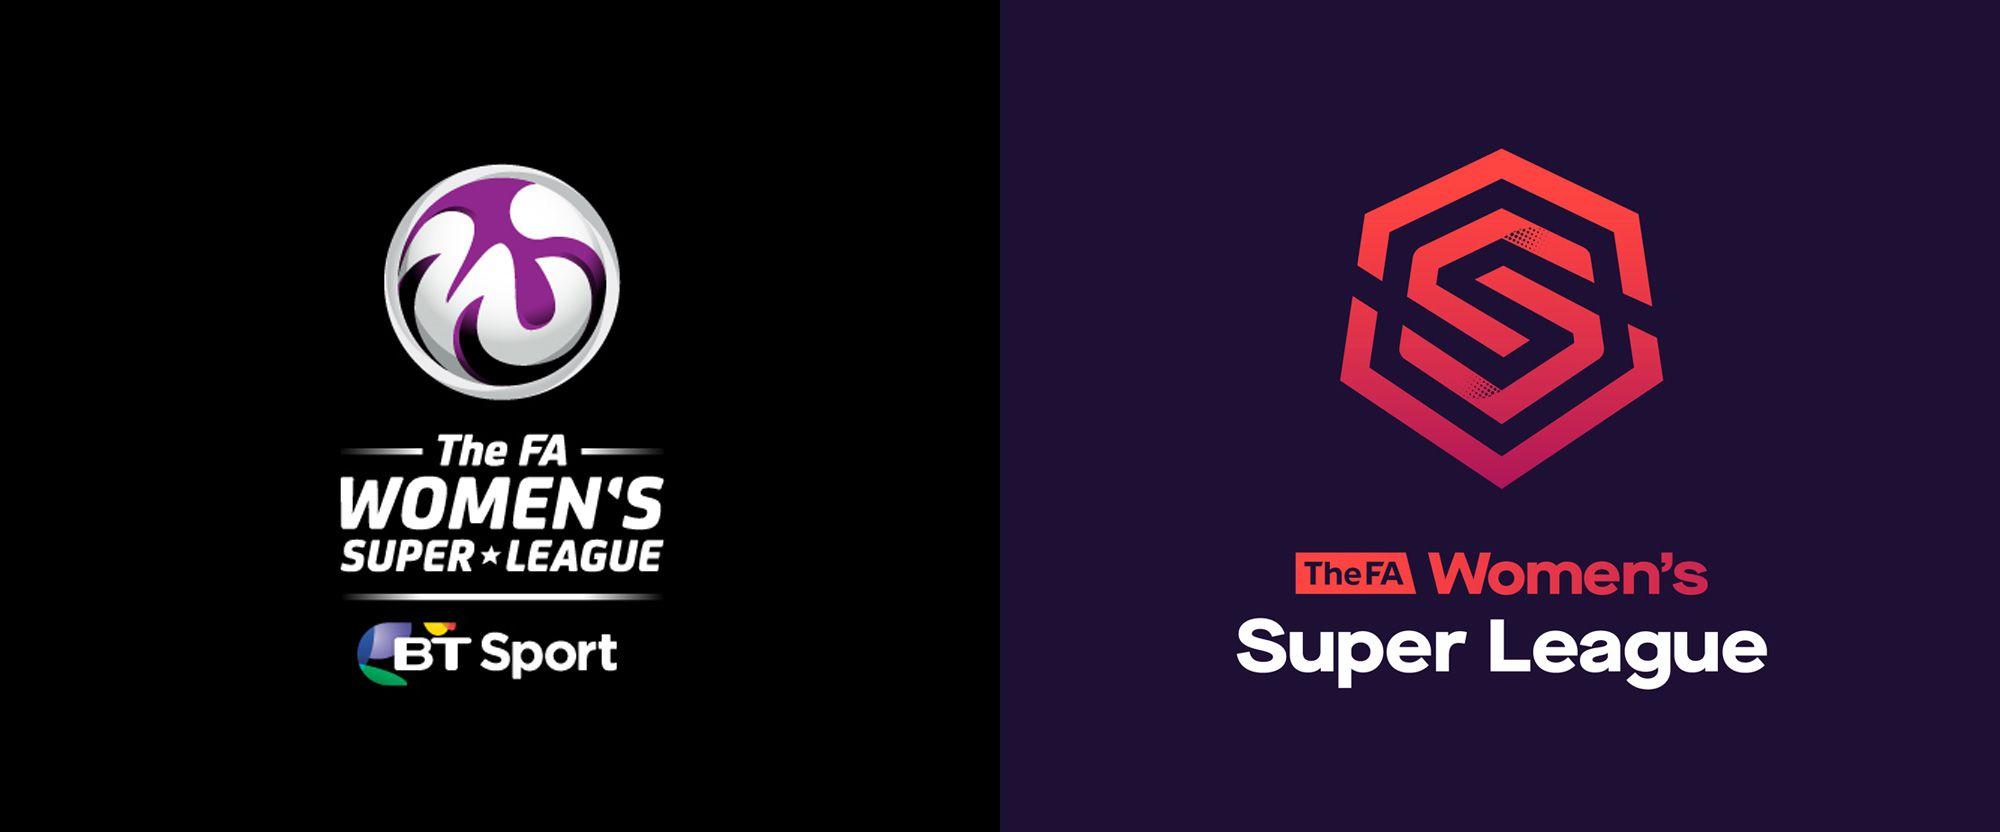 Super Logo - Brand New: New Logos and Identity for FA Women's Leagues by Nomad